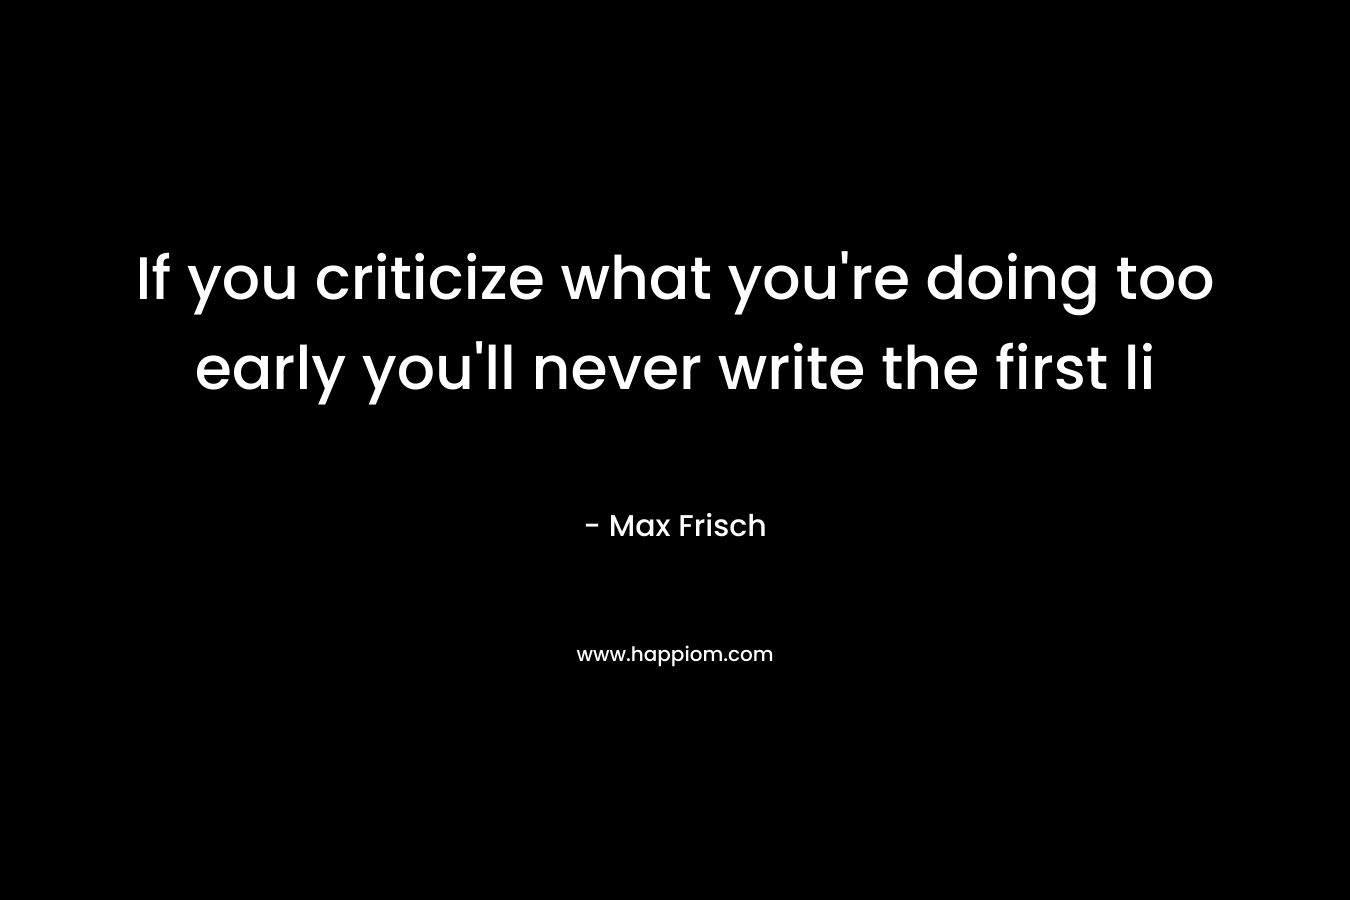 If you criticize what you're doing too early you'll never write the first li